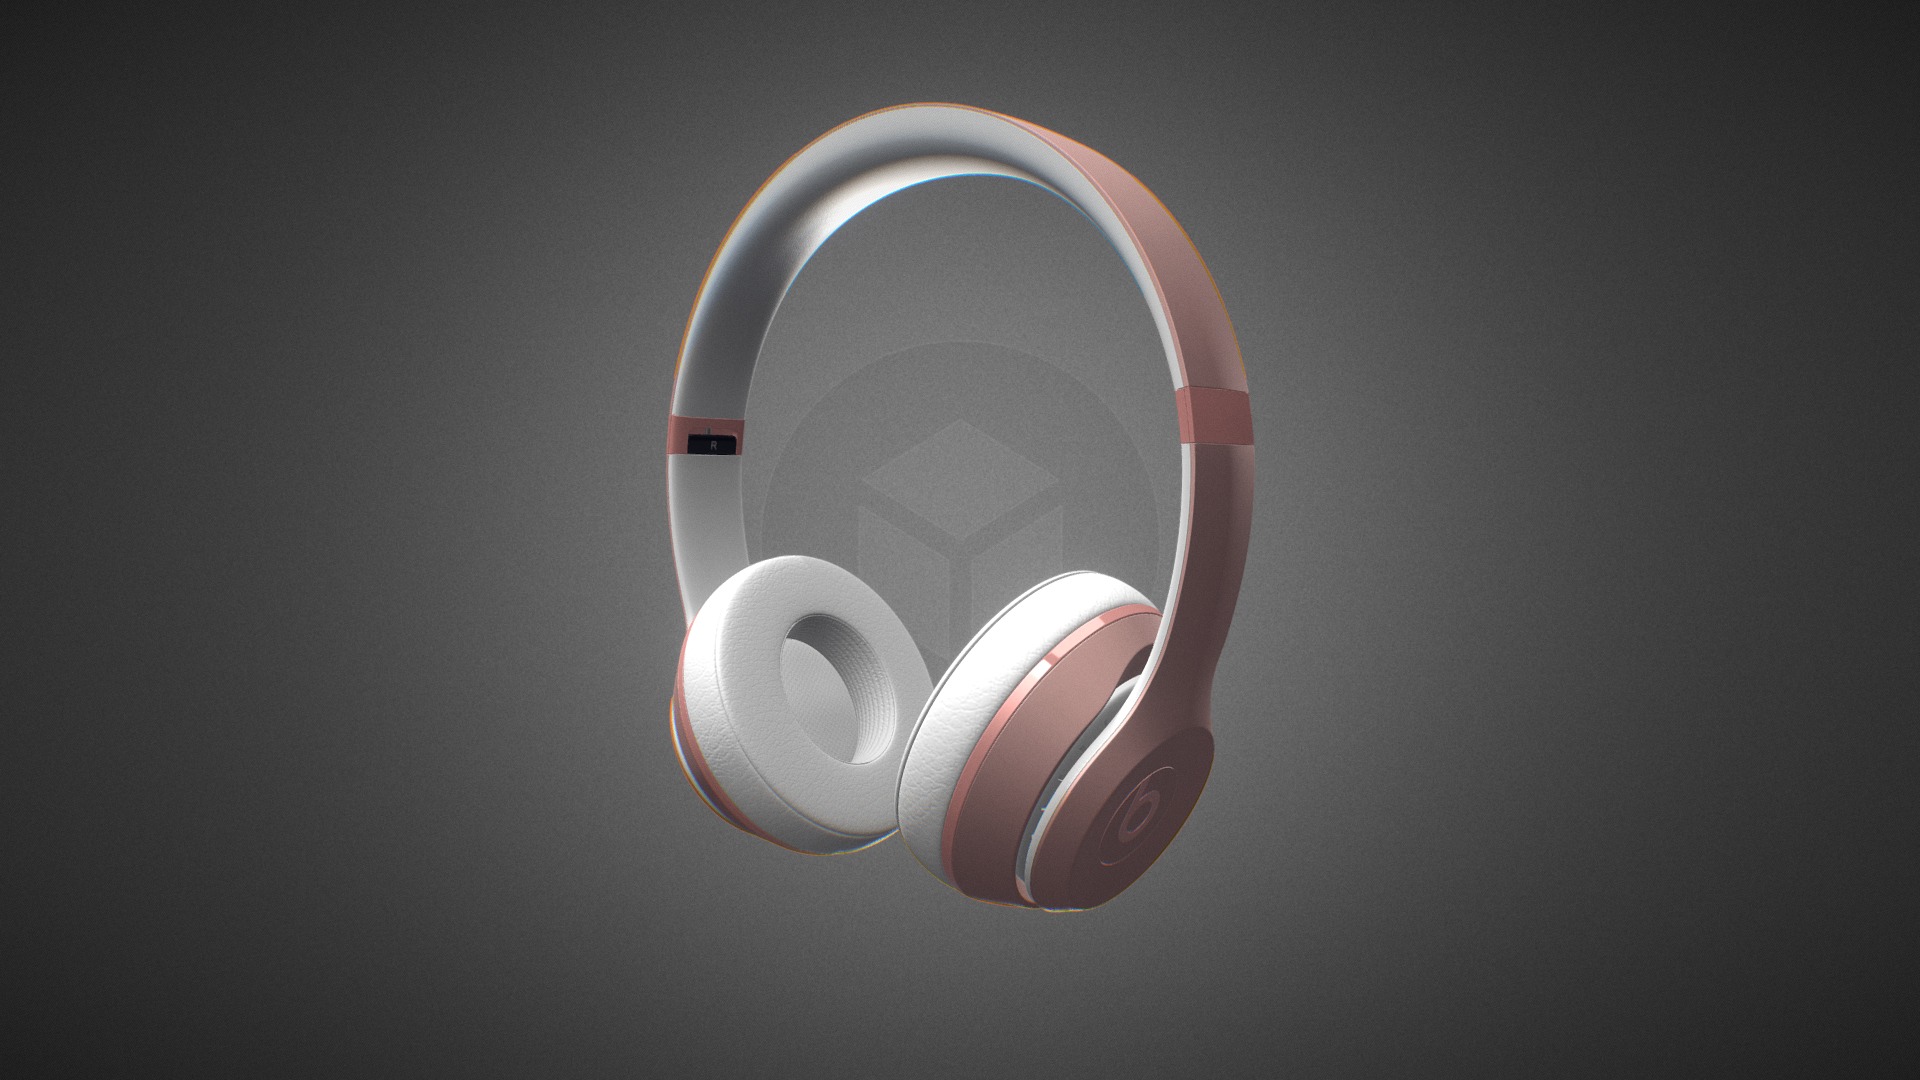 3D model Beats Solo3 Wireless for Element 3D - This is a 3D model of the Beats Solo3 Wireless for Element 3D. The 3D model is about a white headphone with a red and white design.